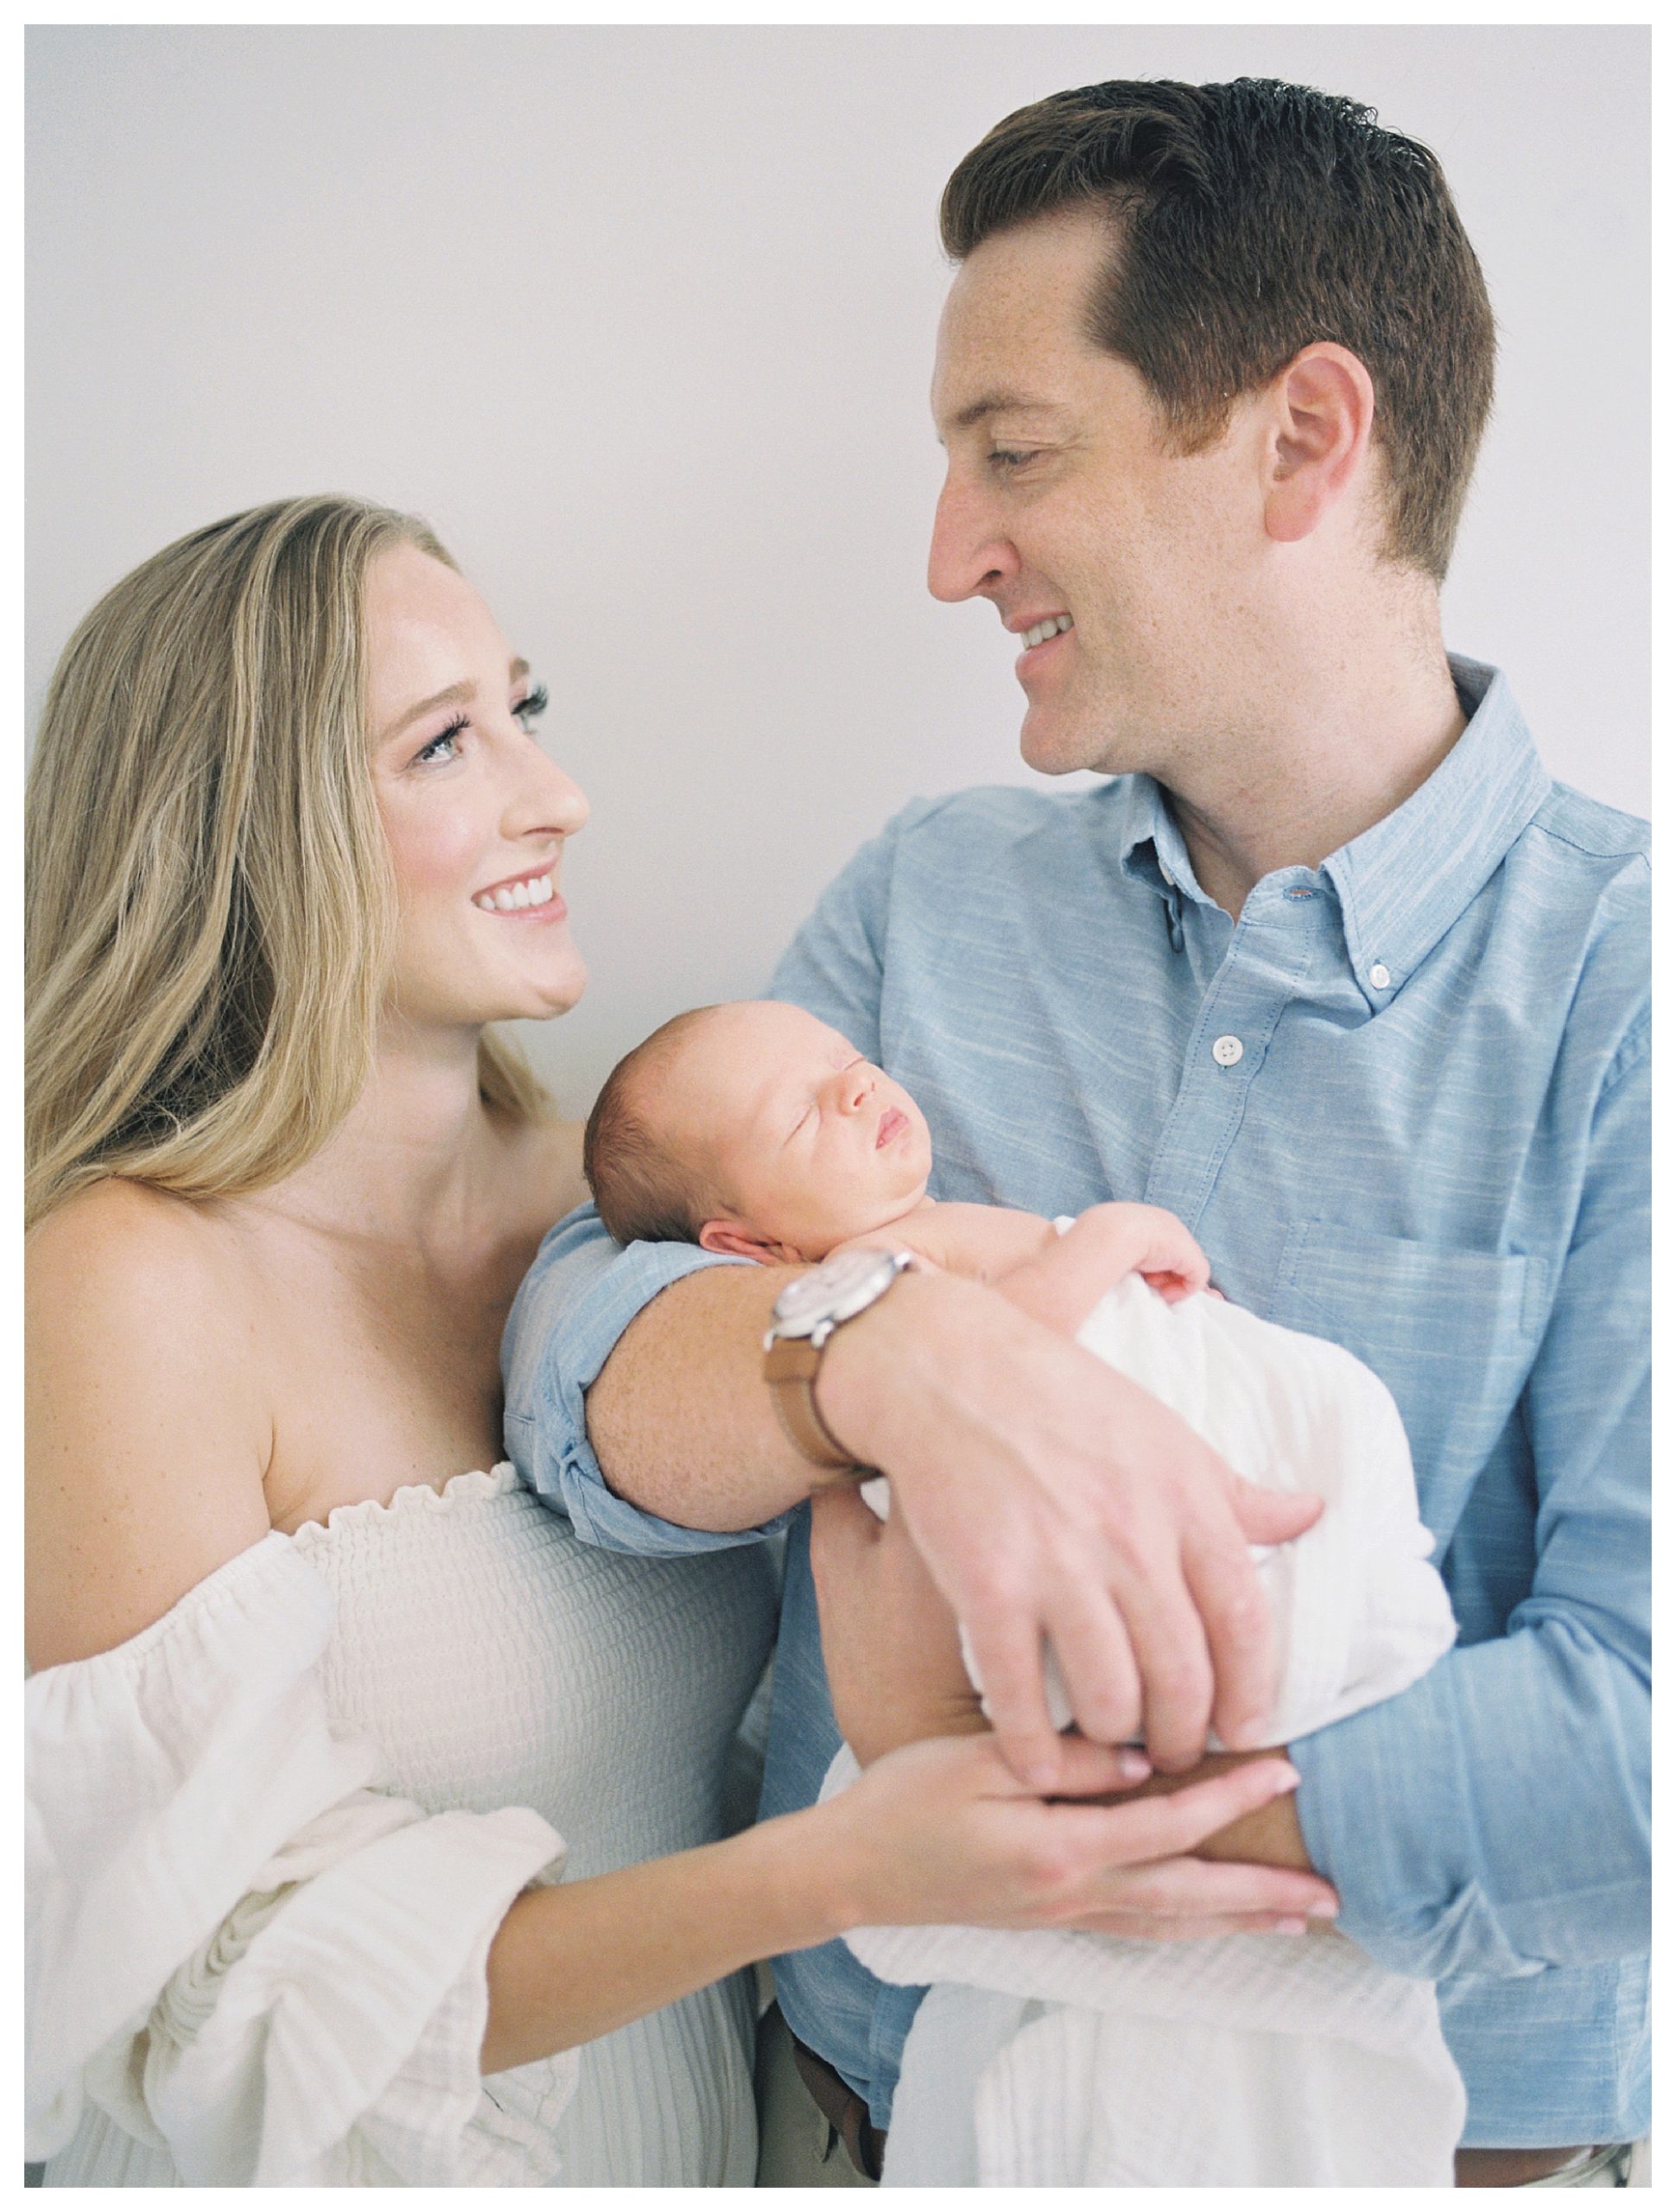 New parents look and smile at one another as they hold their newborn baby.